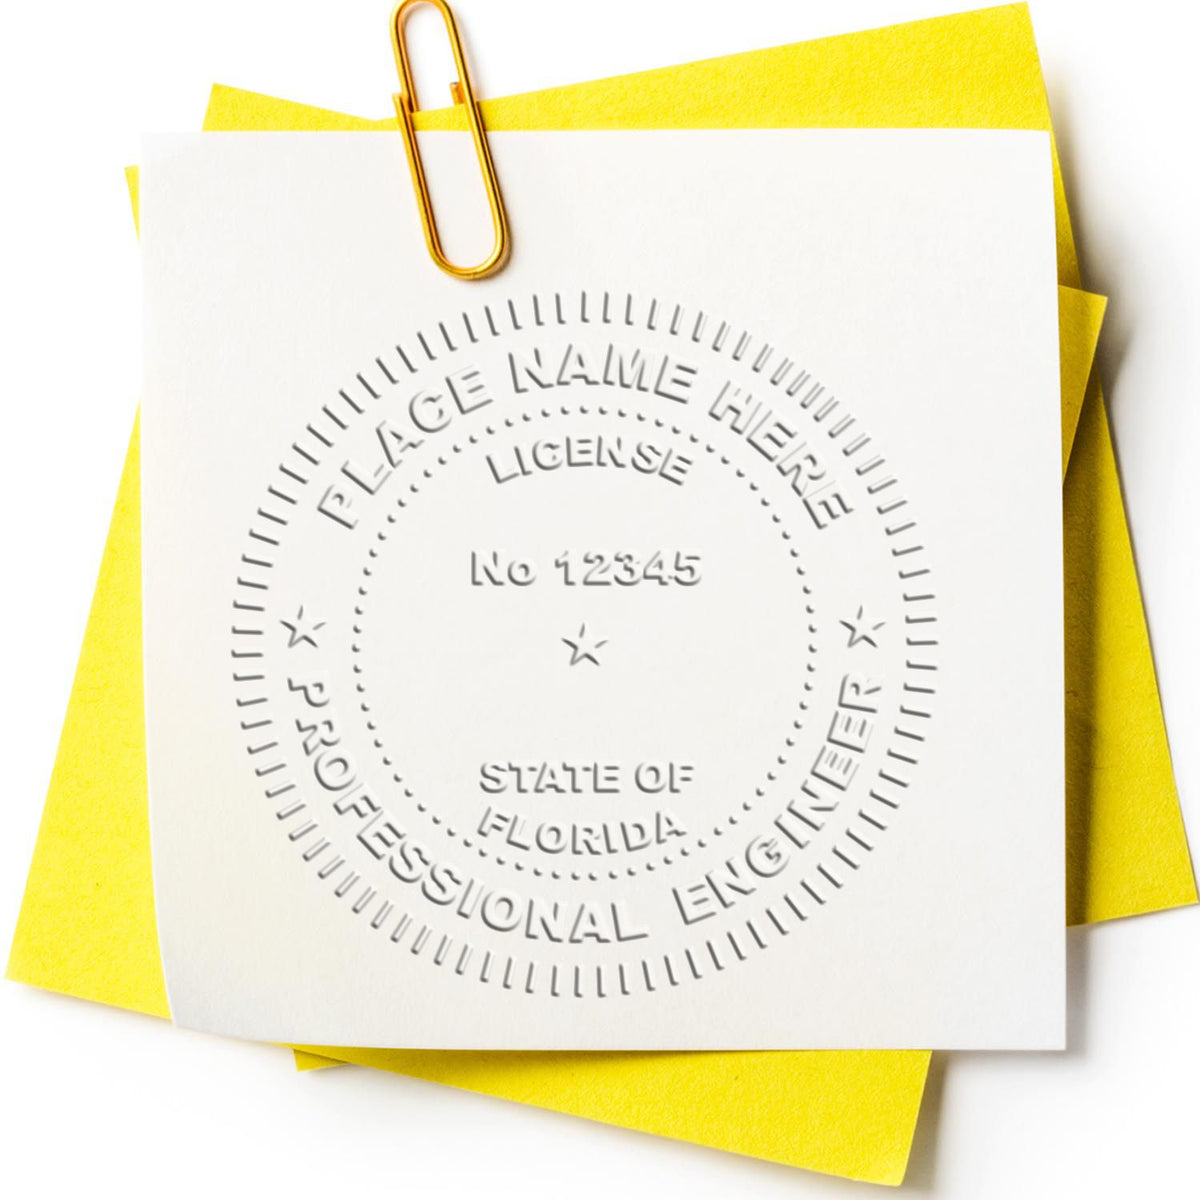 The State of Florida Extended Long Reach Engineer Seal stamp impression comes to life with a crisp, detailed photo on paper - showcasing true professional quality.